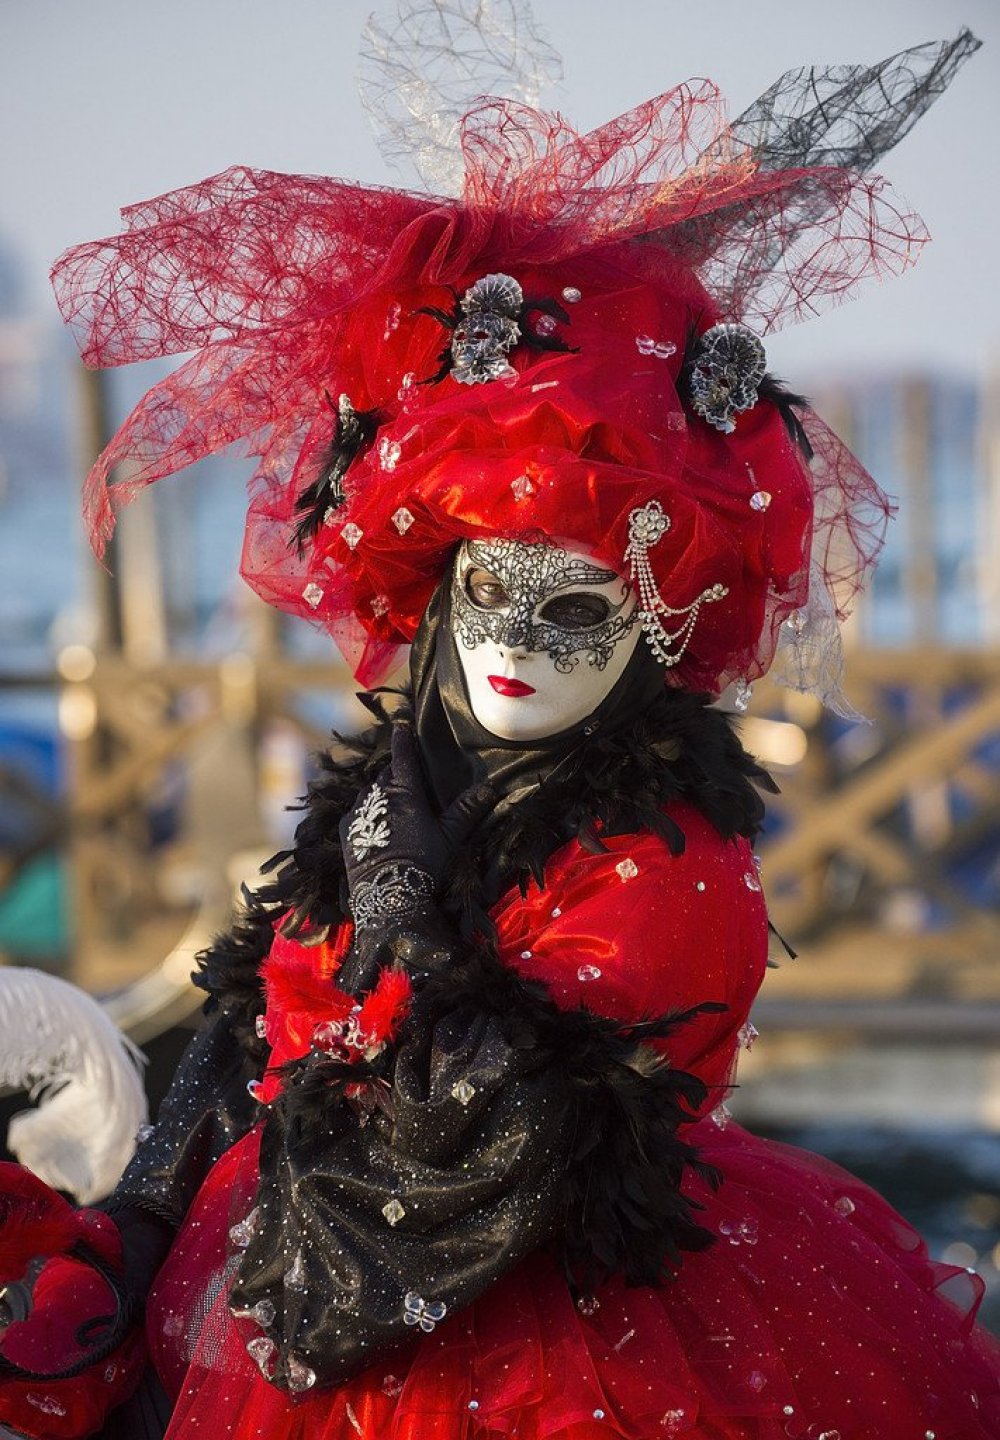 The Venetian Carnival in All Its Glory